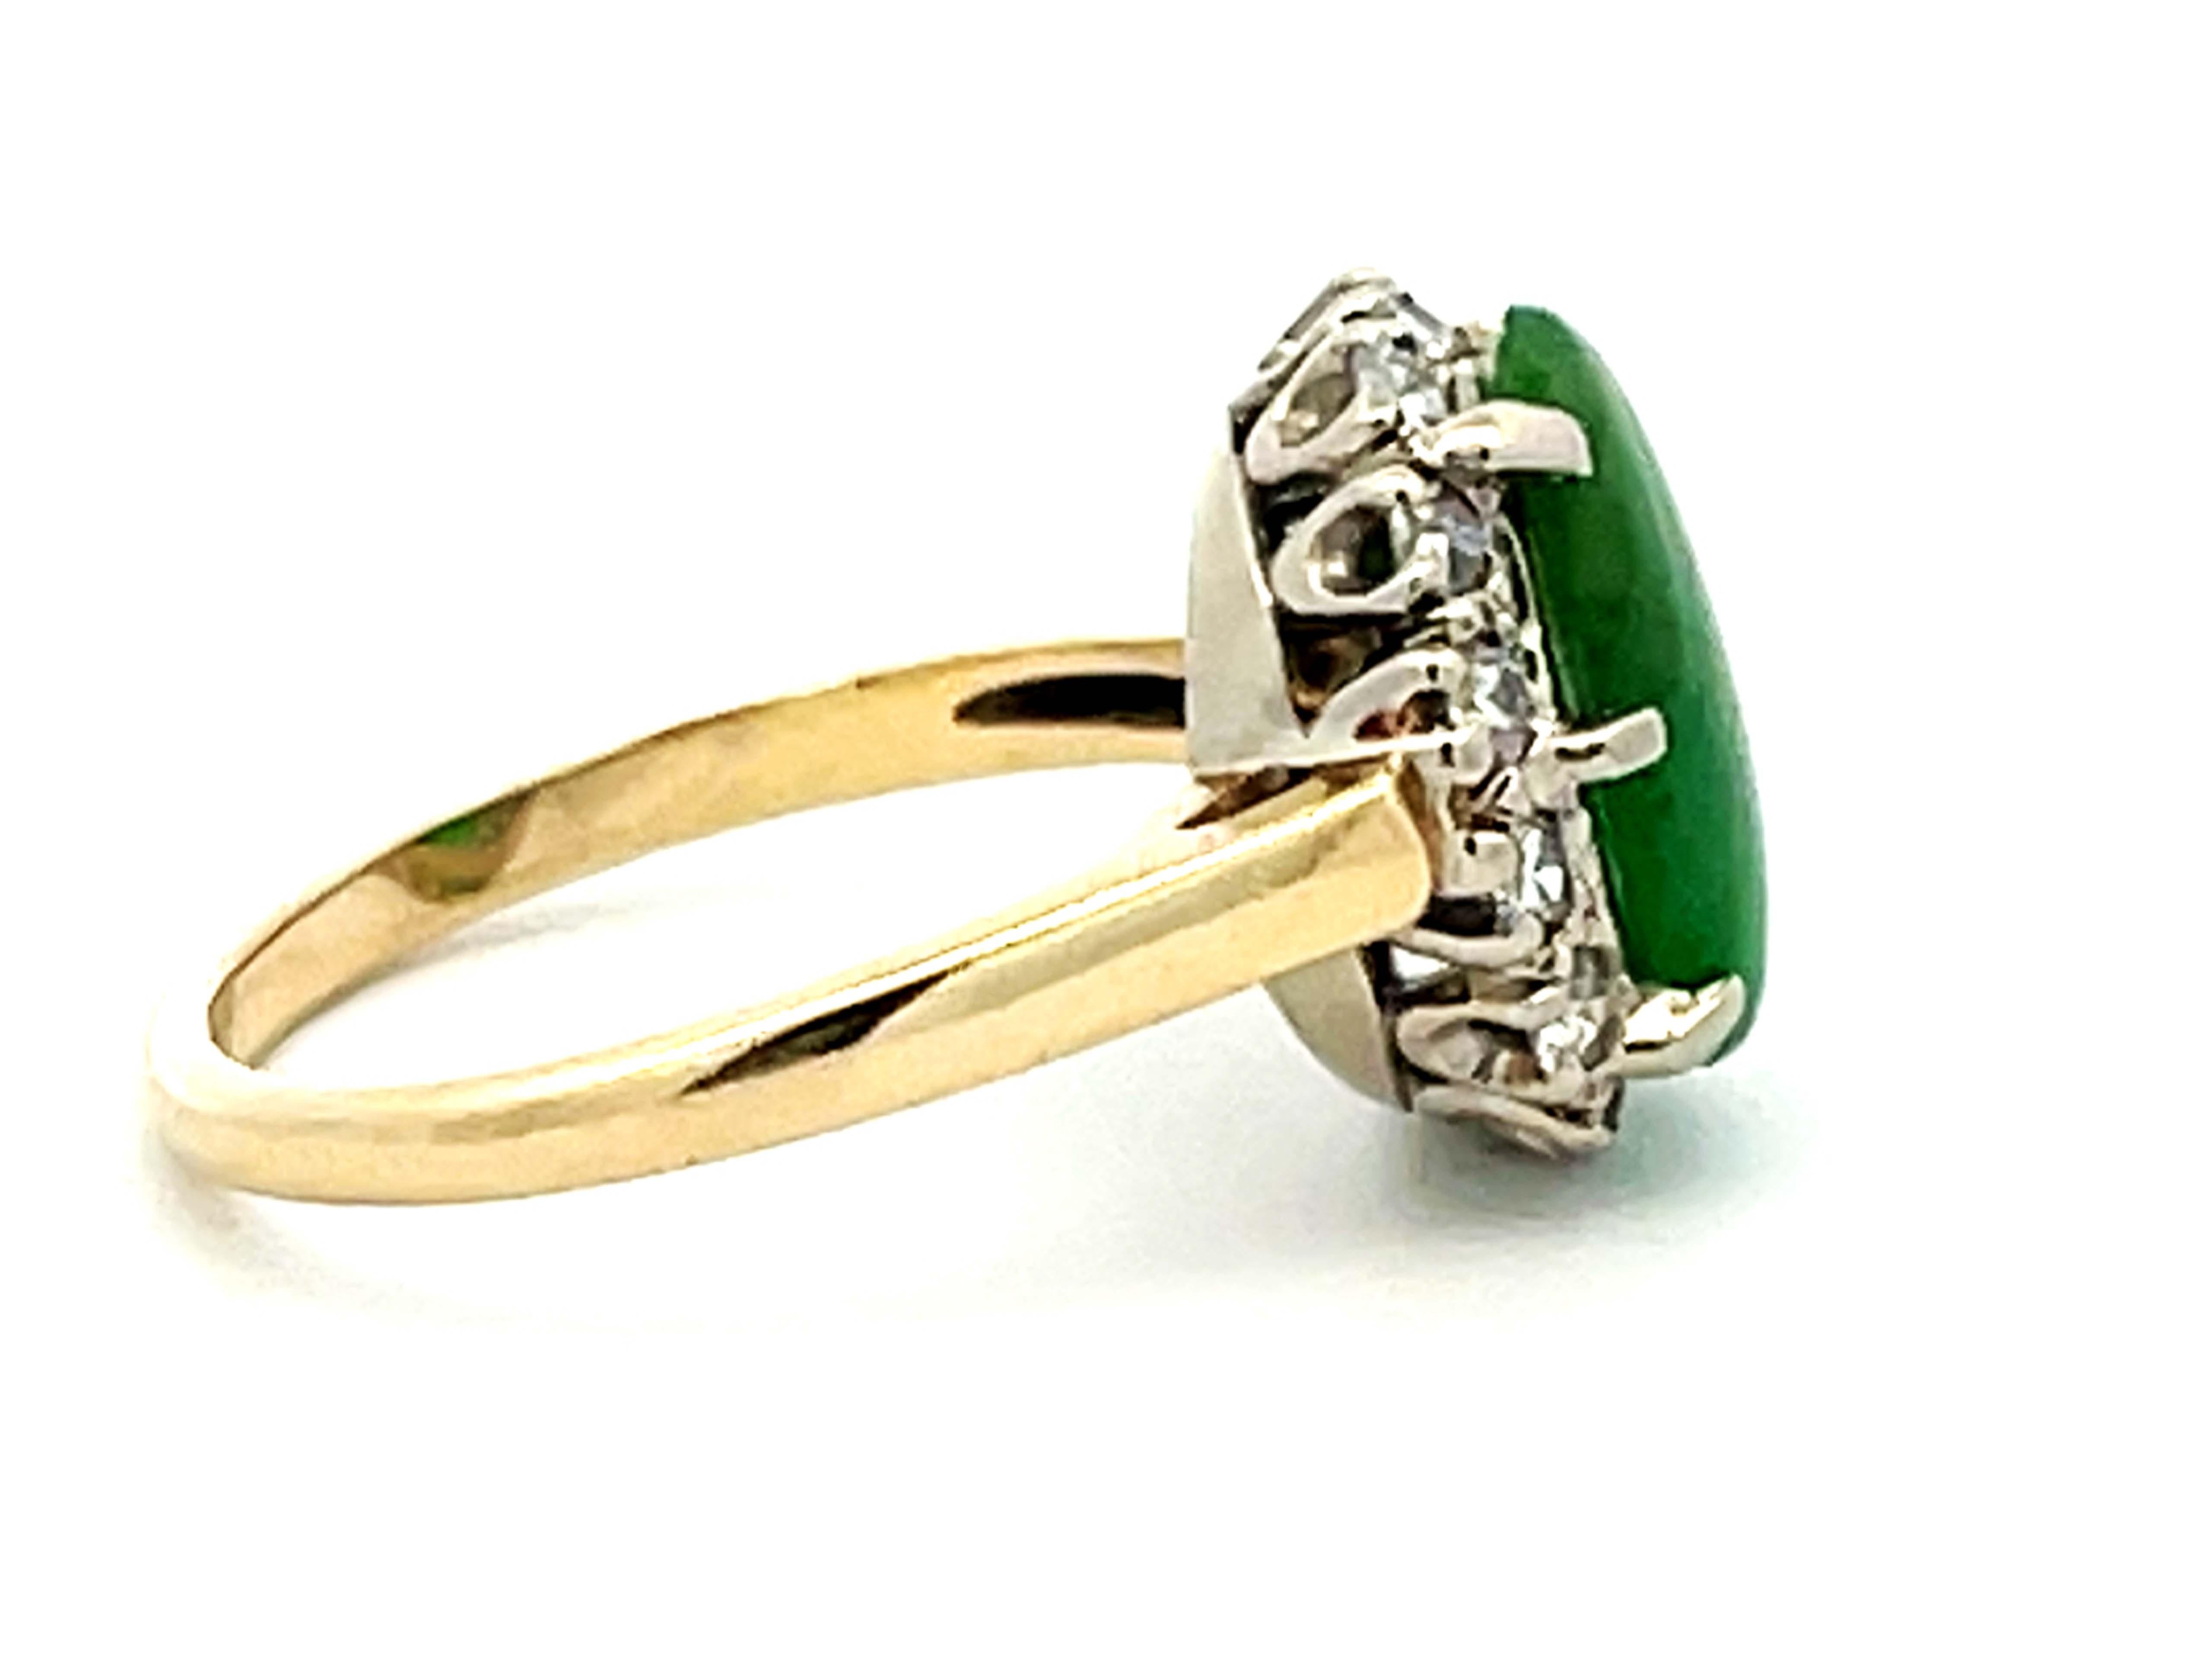 Vintage Green Jade Diamond Halo Gold Ring In Excellent Condition For Sale In Honolulu, HI